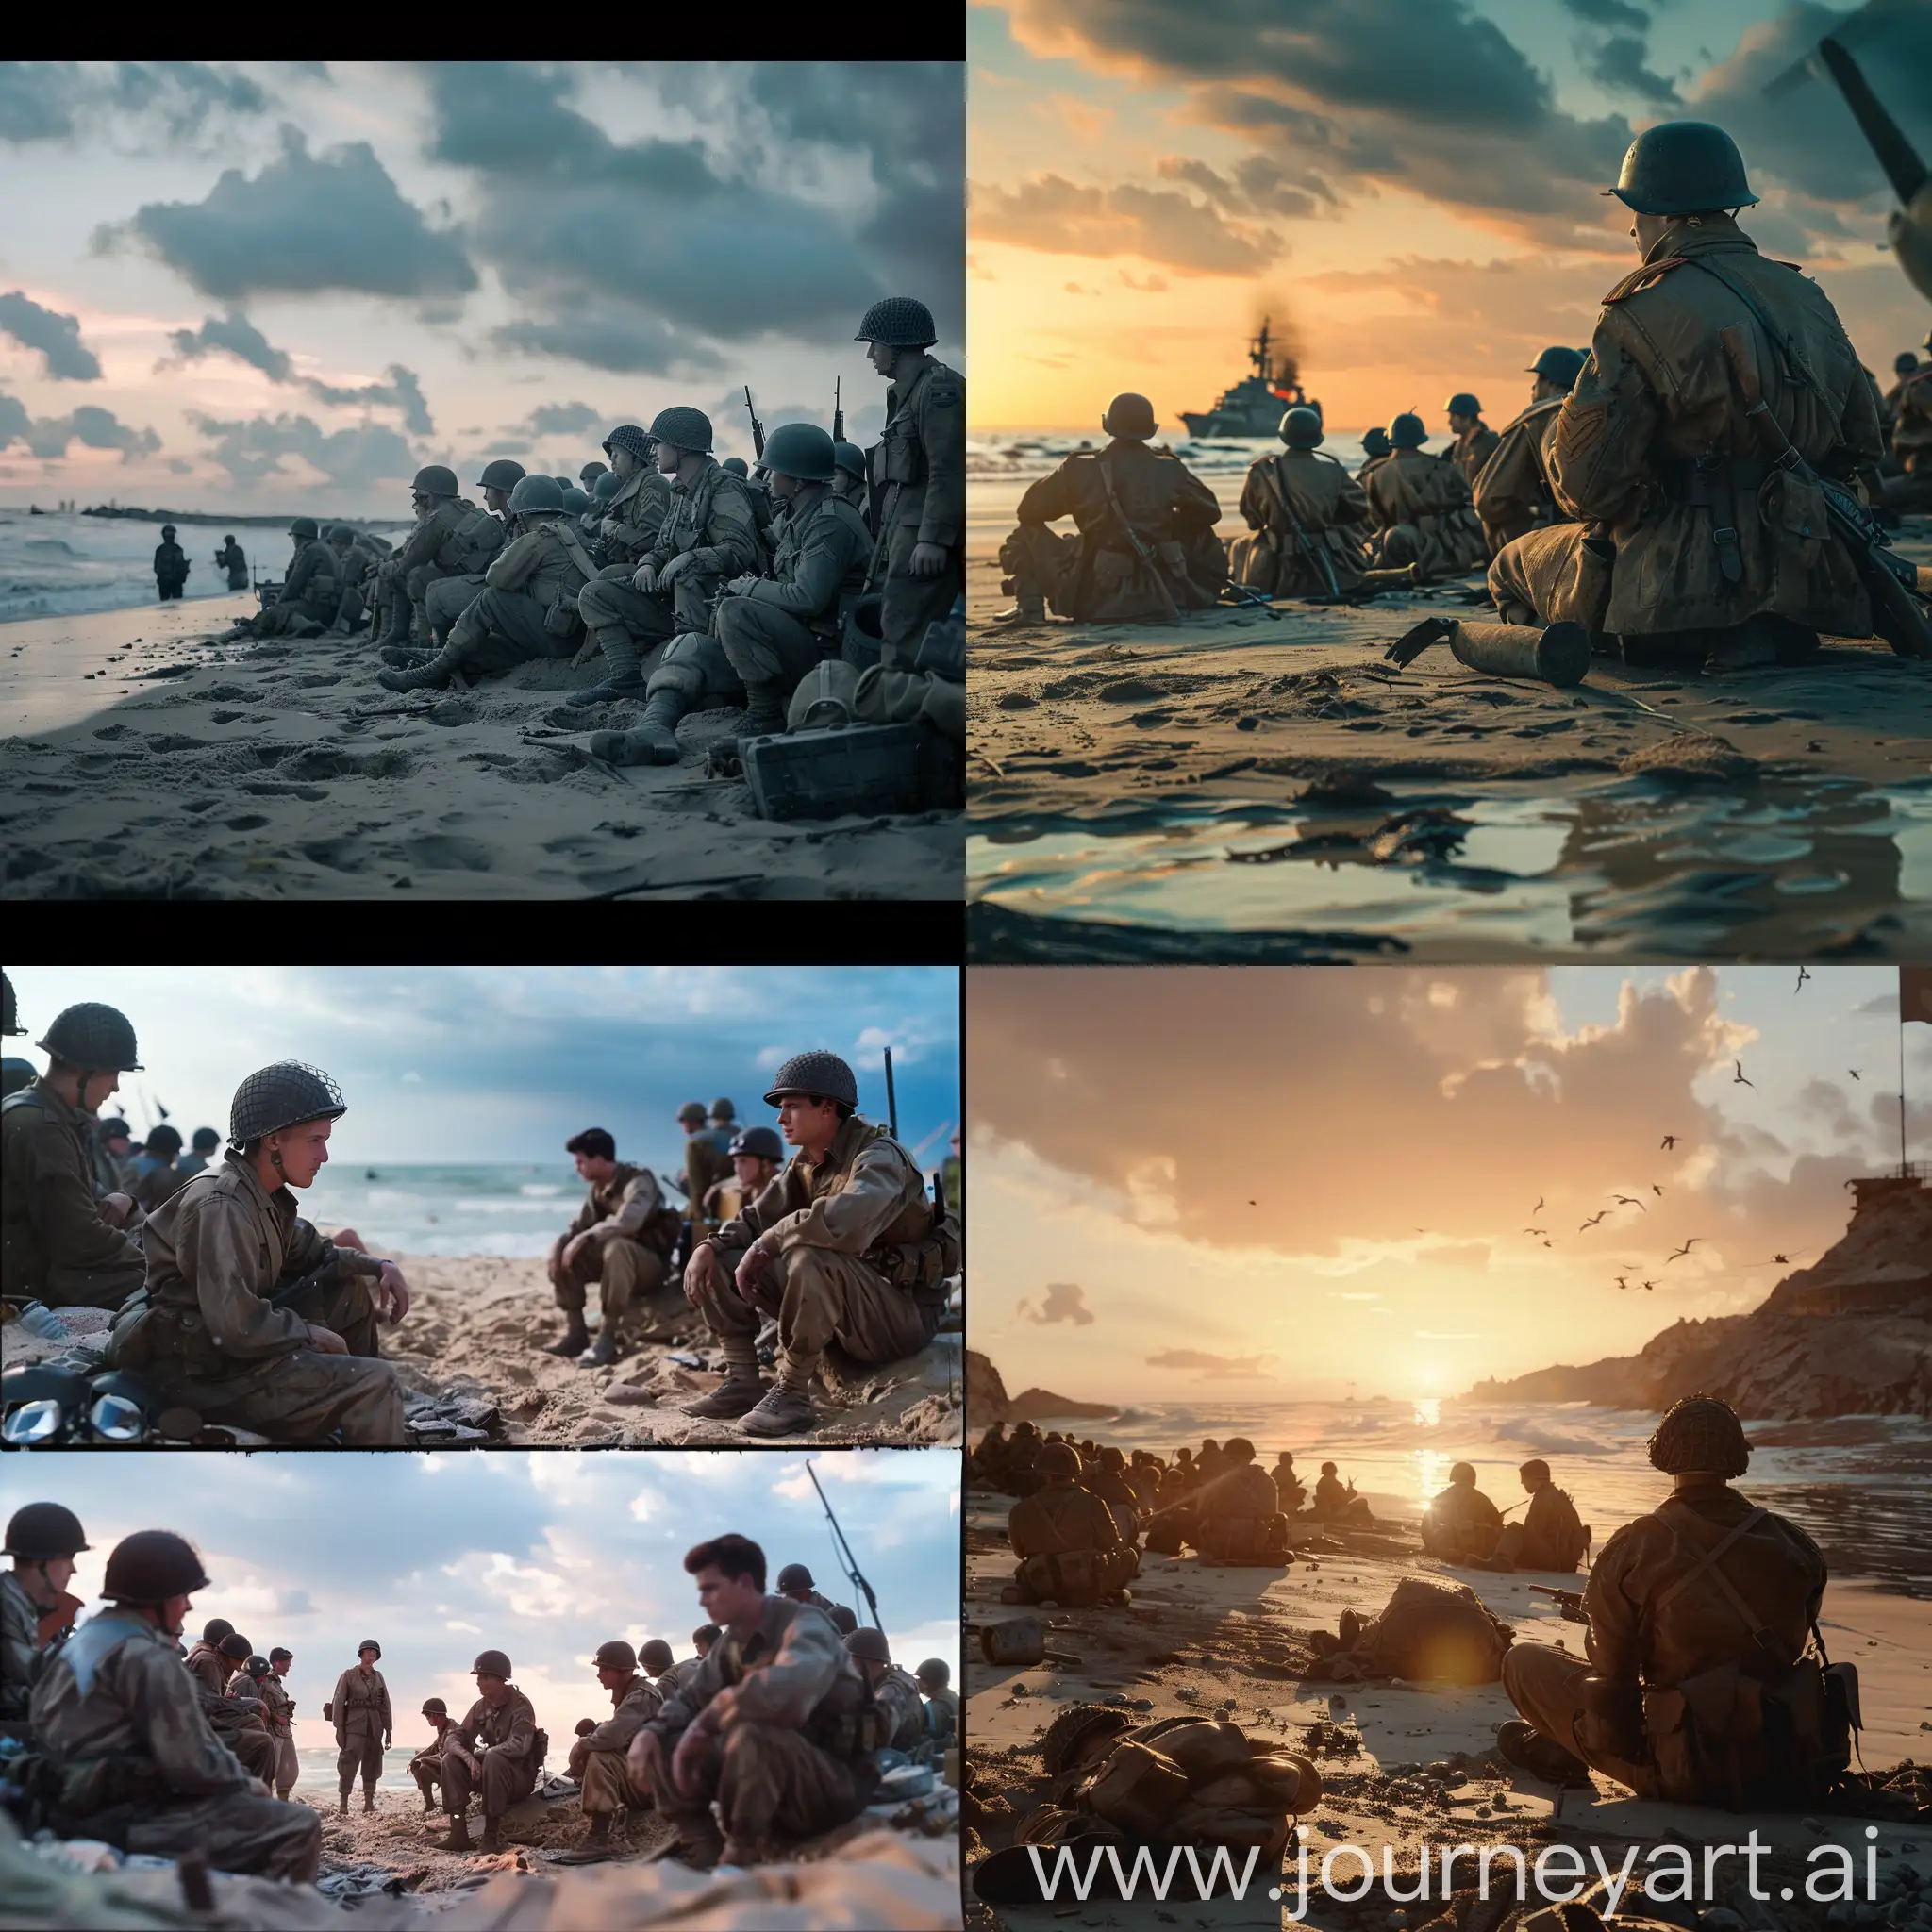 Soldiers-Resting-on-Beach-Cinematic-Dunkirk-Style